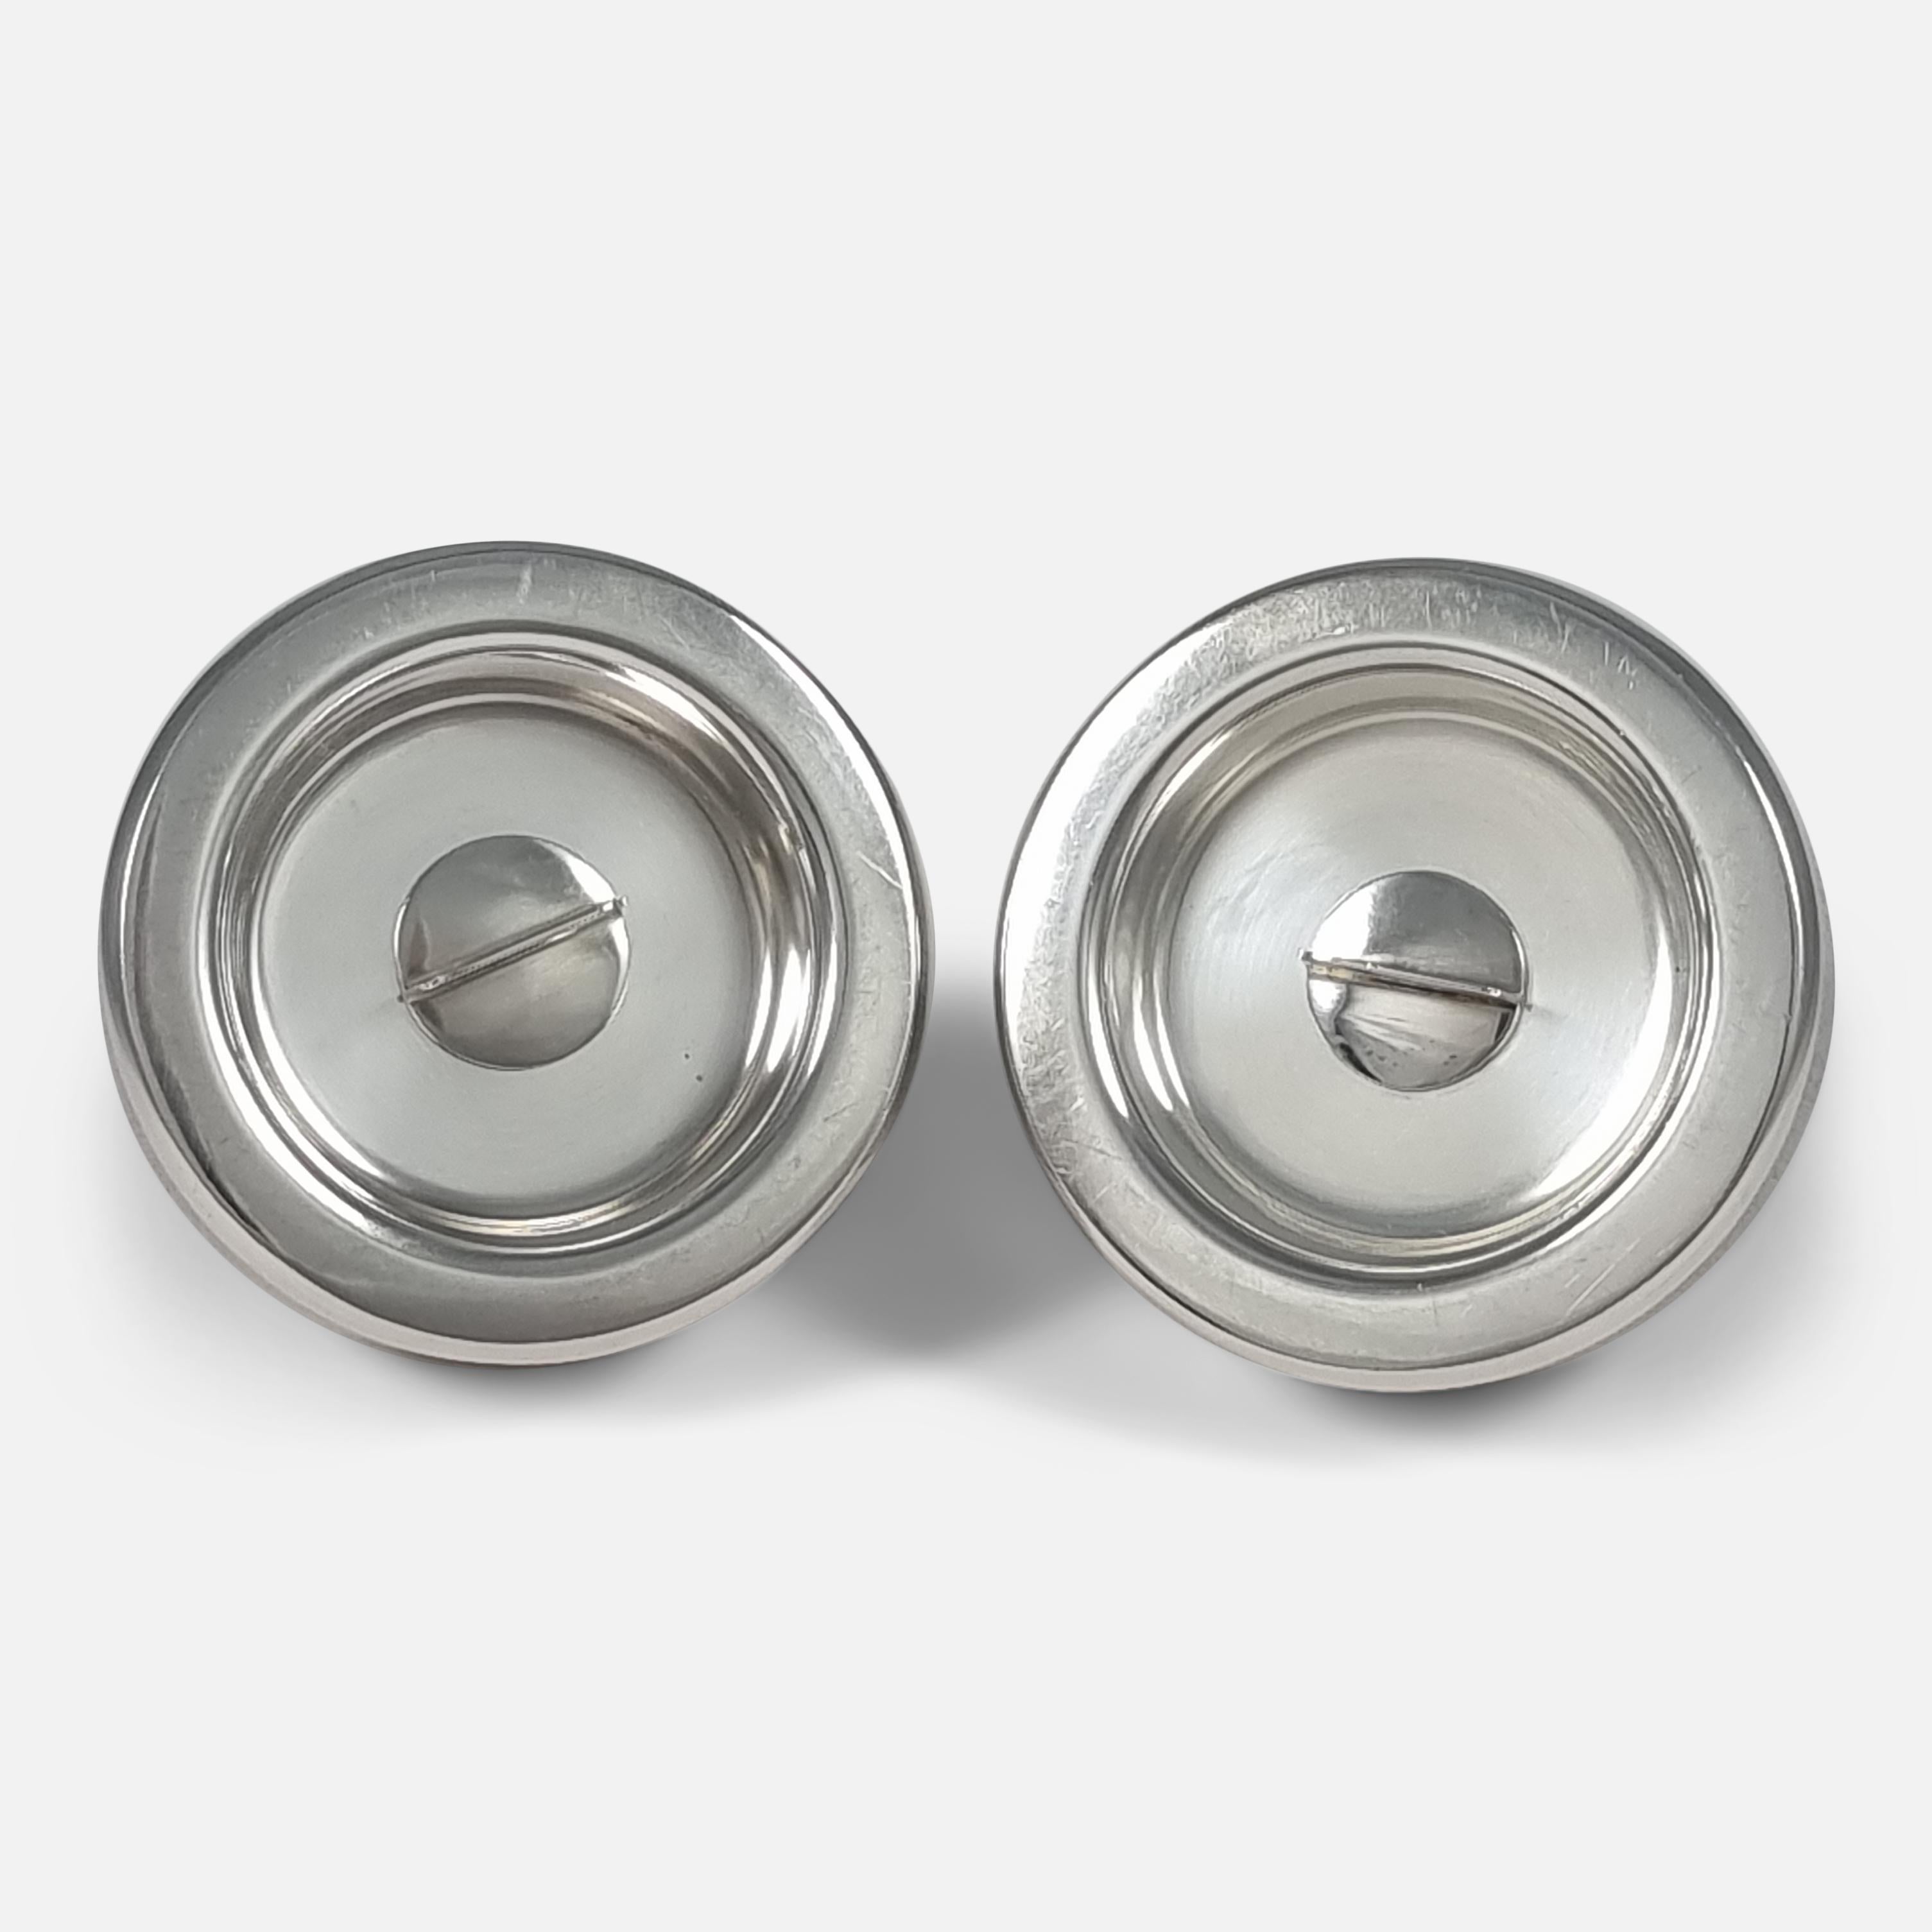 Late 20th Century Sterling Silver Salt & Pepper Shakers, House of Lawrian, 1974 For Sale